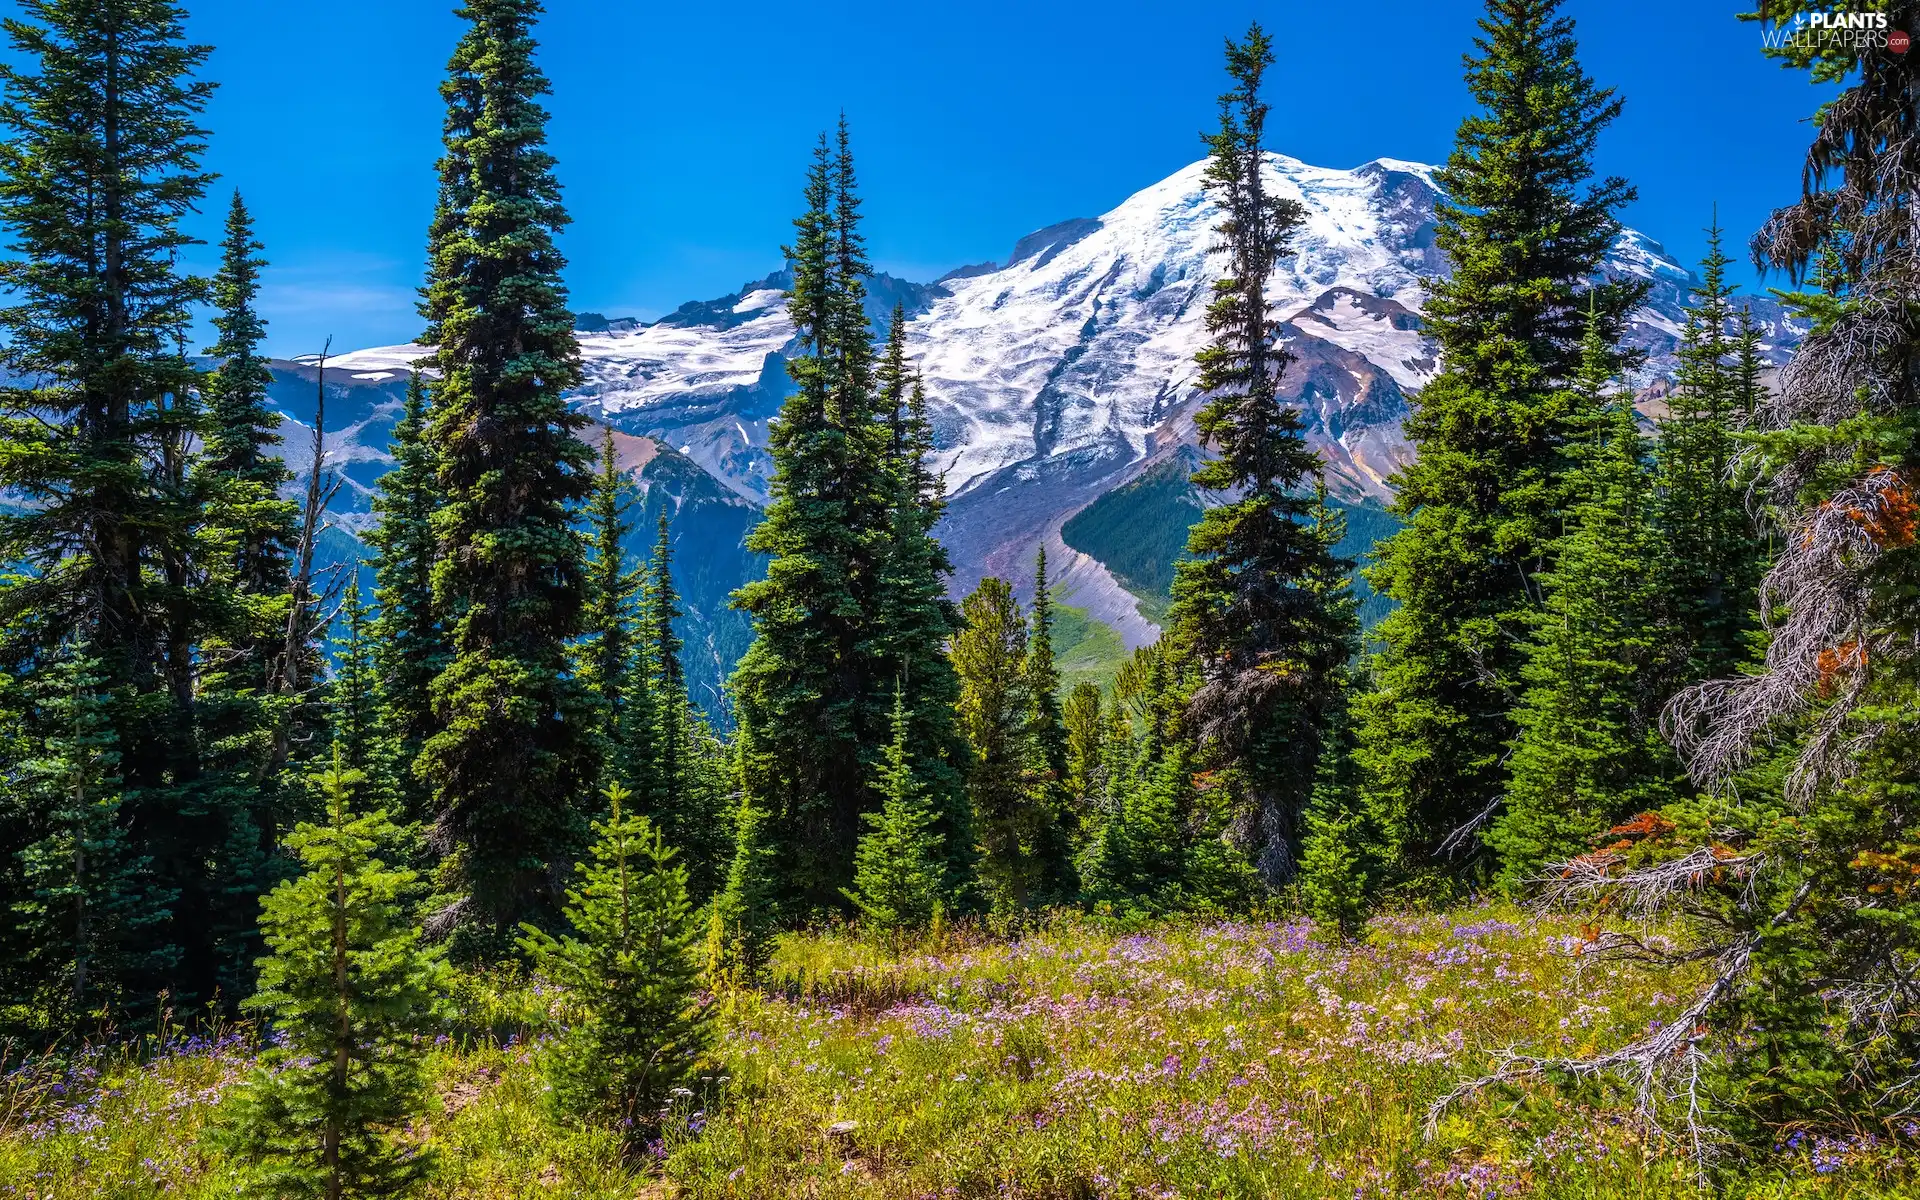 Stratovolcano Mount Rainier, Snowy, viewes, Washington State, Spruces, Mountains, trees, The United States, Mount Rainier National Park, Flowers